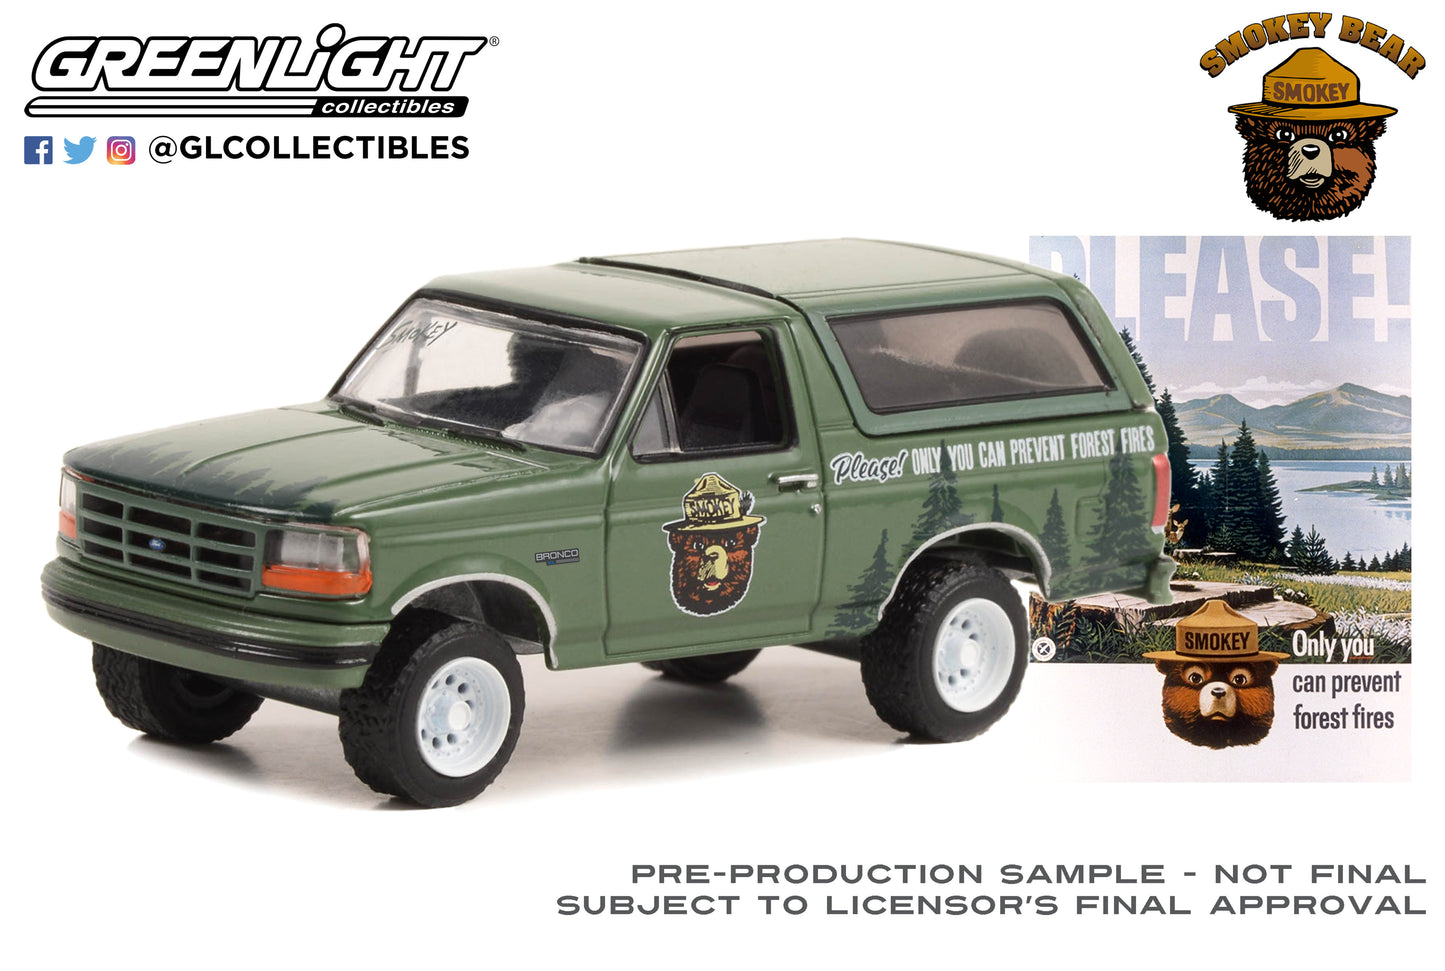 GreenLight 1:64 Smokey Bear Series 2 - 1996 Ford Bronco “Please! Only You Can Prevent Forest Fires” 38040-E